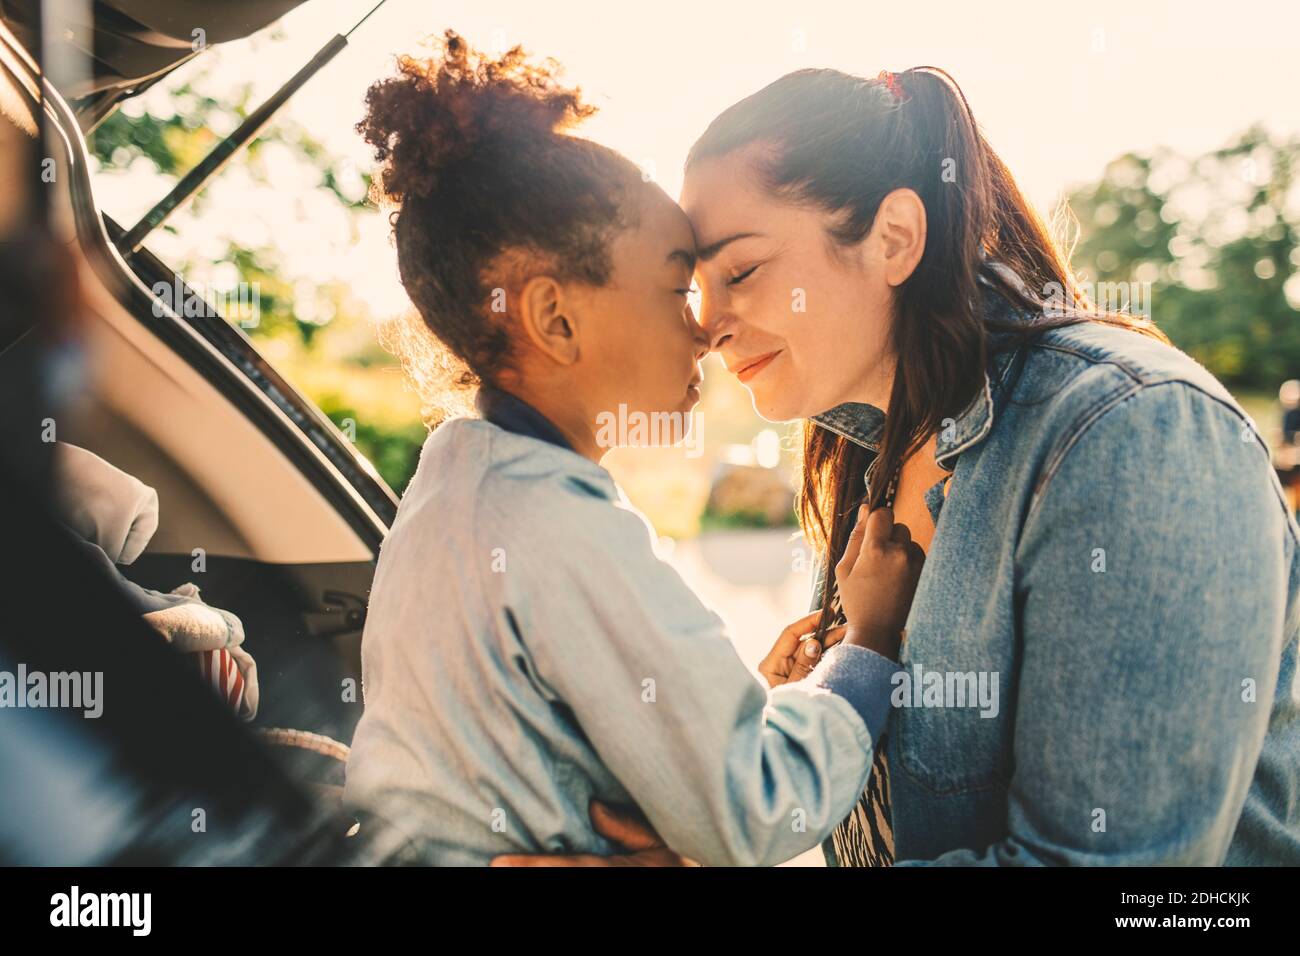 Smiling woman and daughter sitting face to face with eyes closed in car trunk during picnic Stock Photo